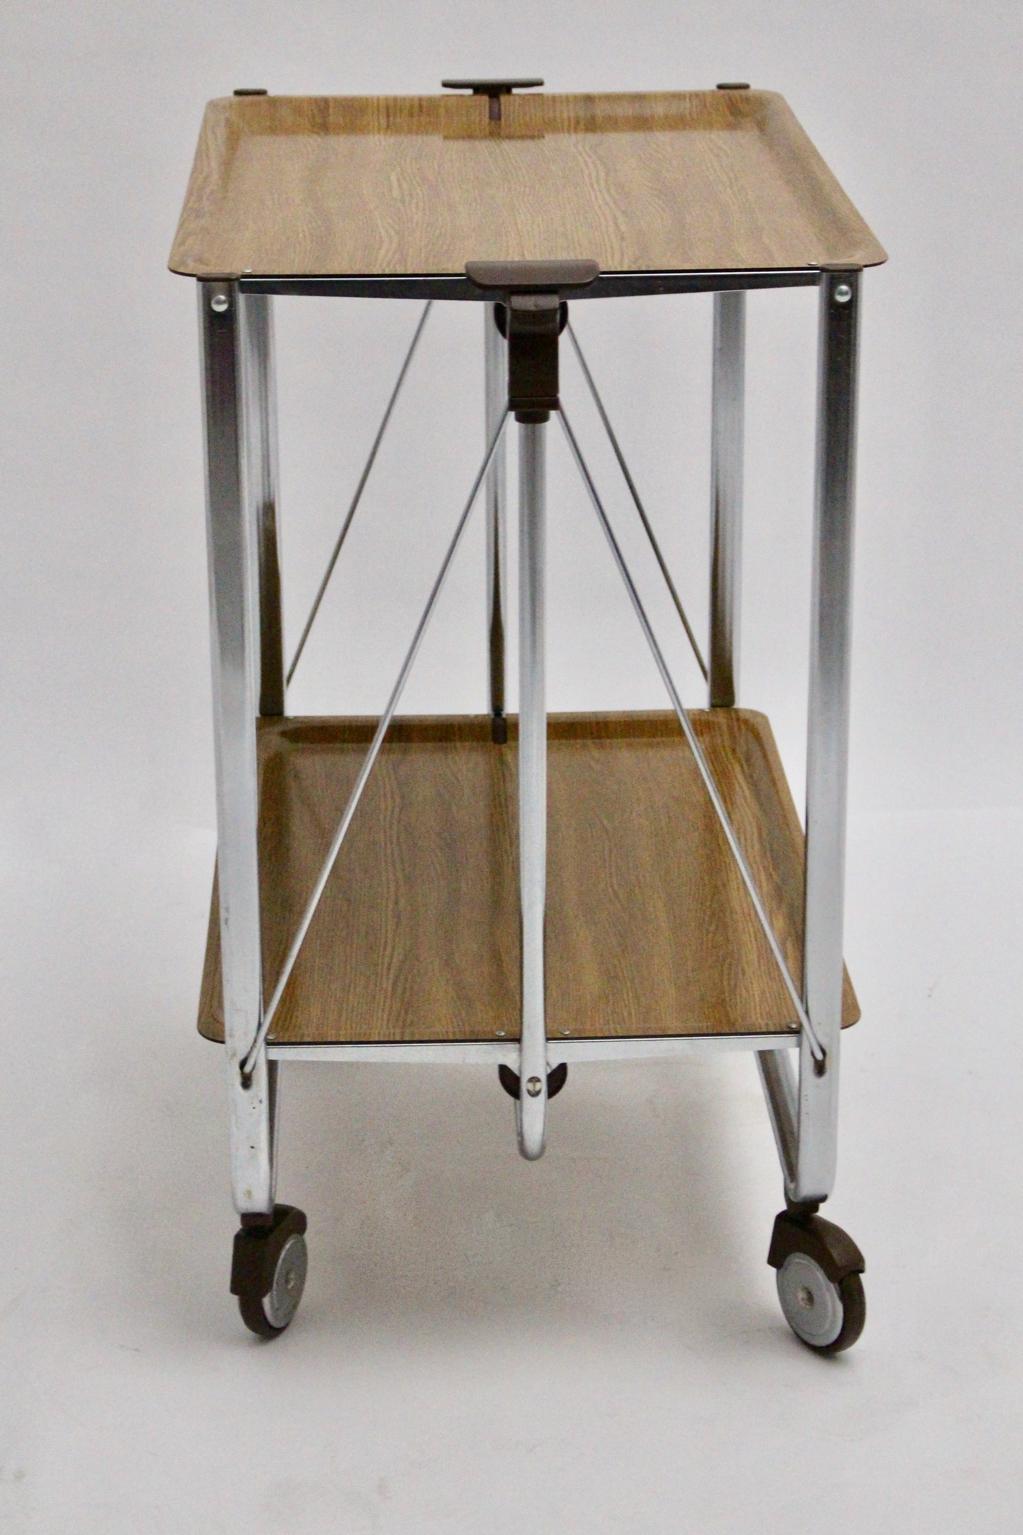 This foldable serving table from the 1960s era features a chromed base with two tiers and four wheels.
The serving table consists of chromed metal and plastic.
The vintage condition is very good.

approx. measures:
Width 69 cm
Depth 41.5 cm
Height